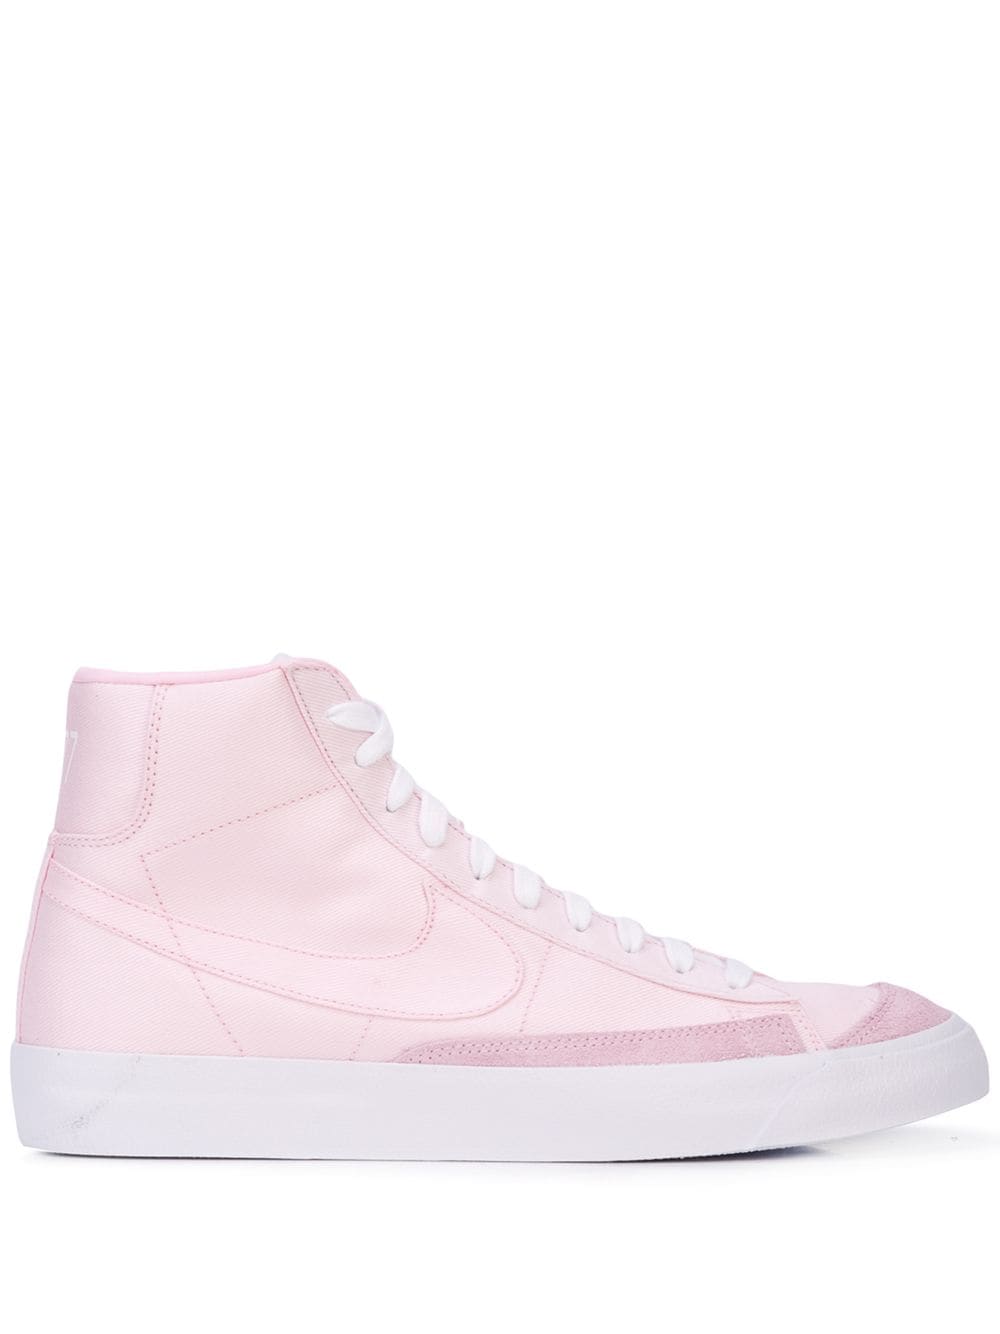 pink high top nike shoes